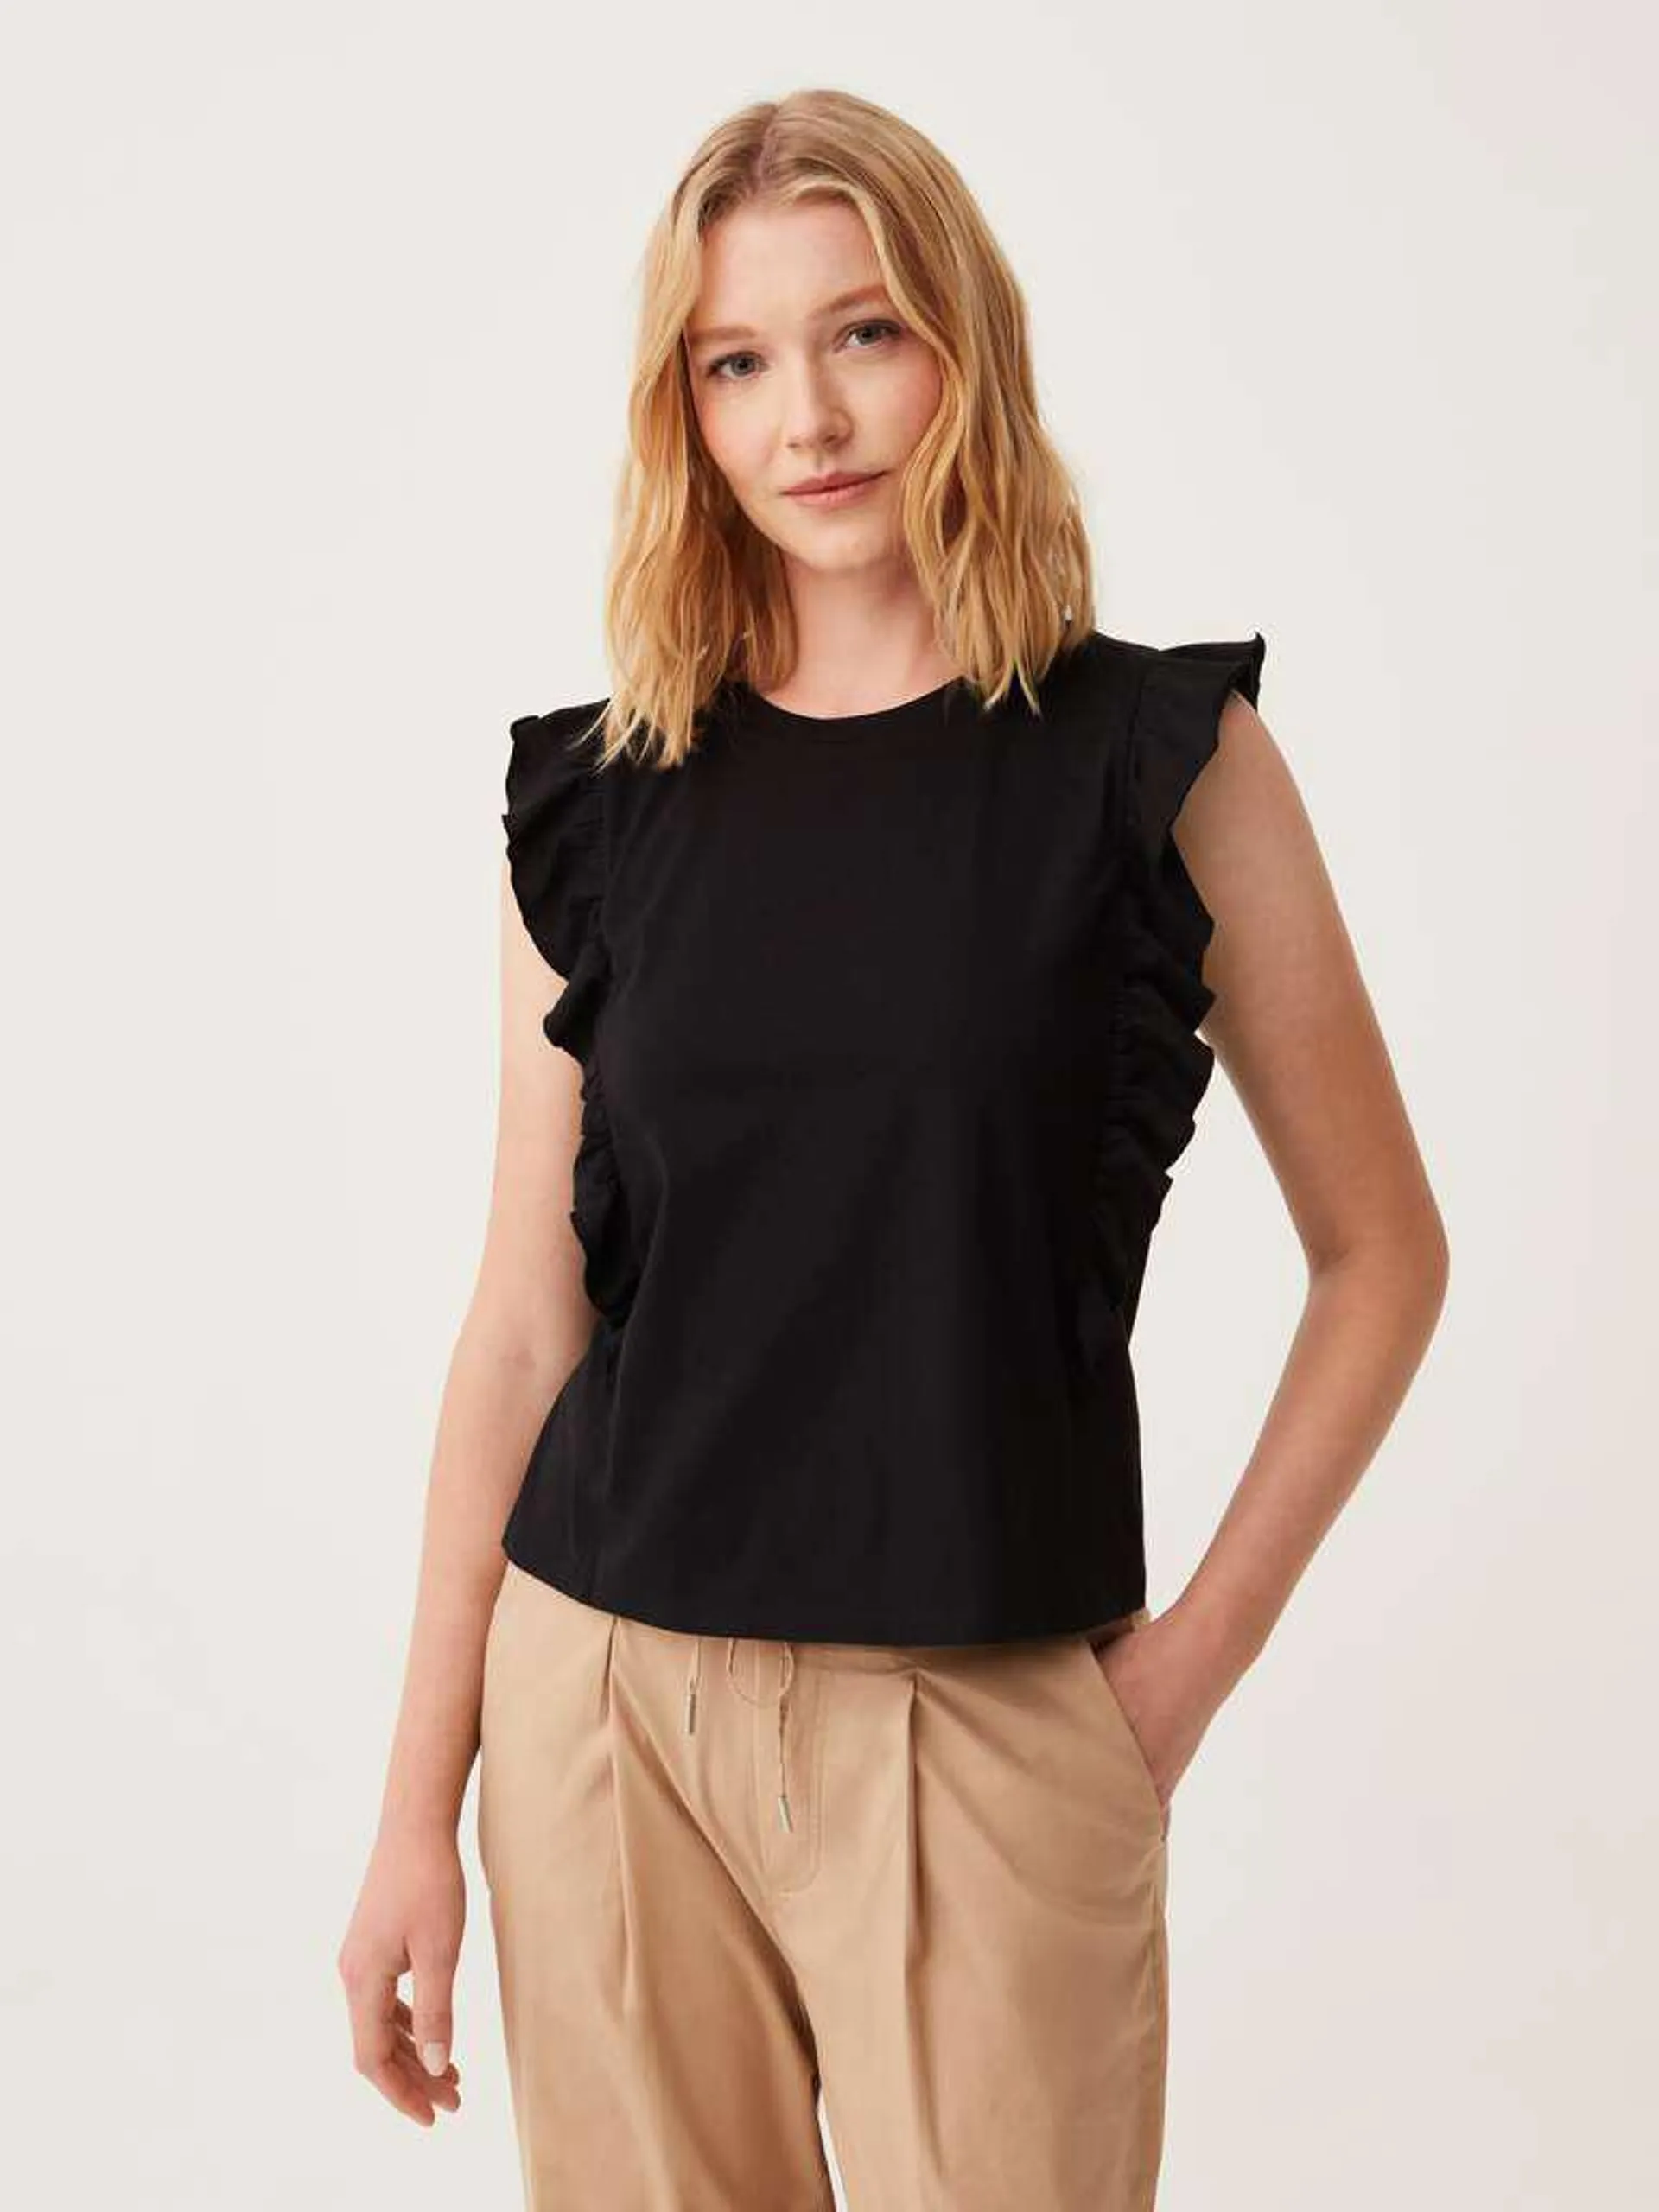 Black Cotton tank top with frills